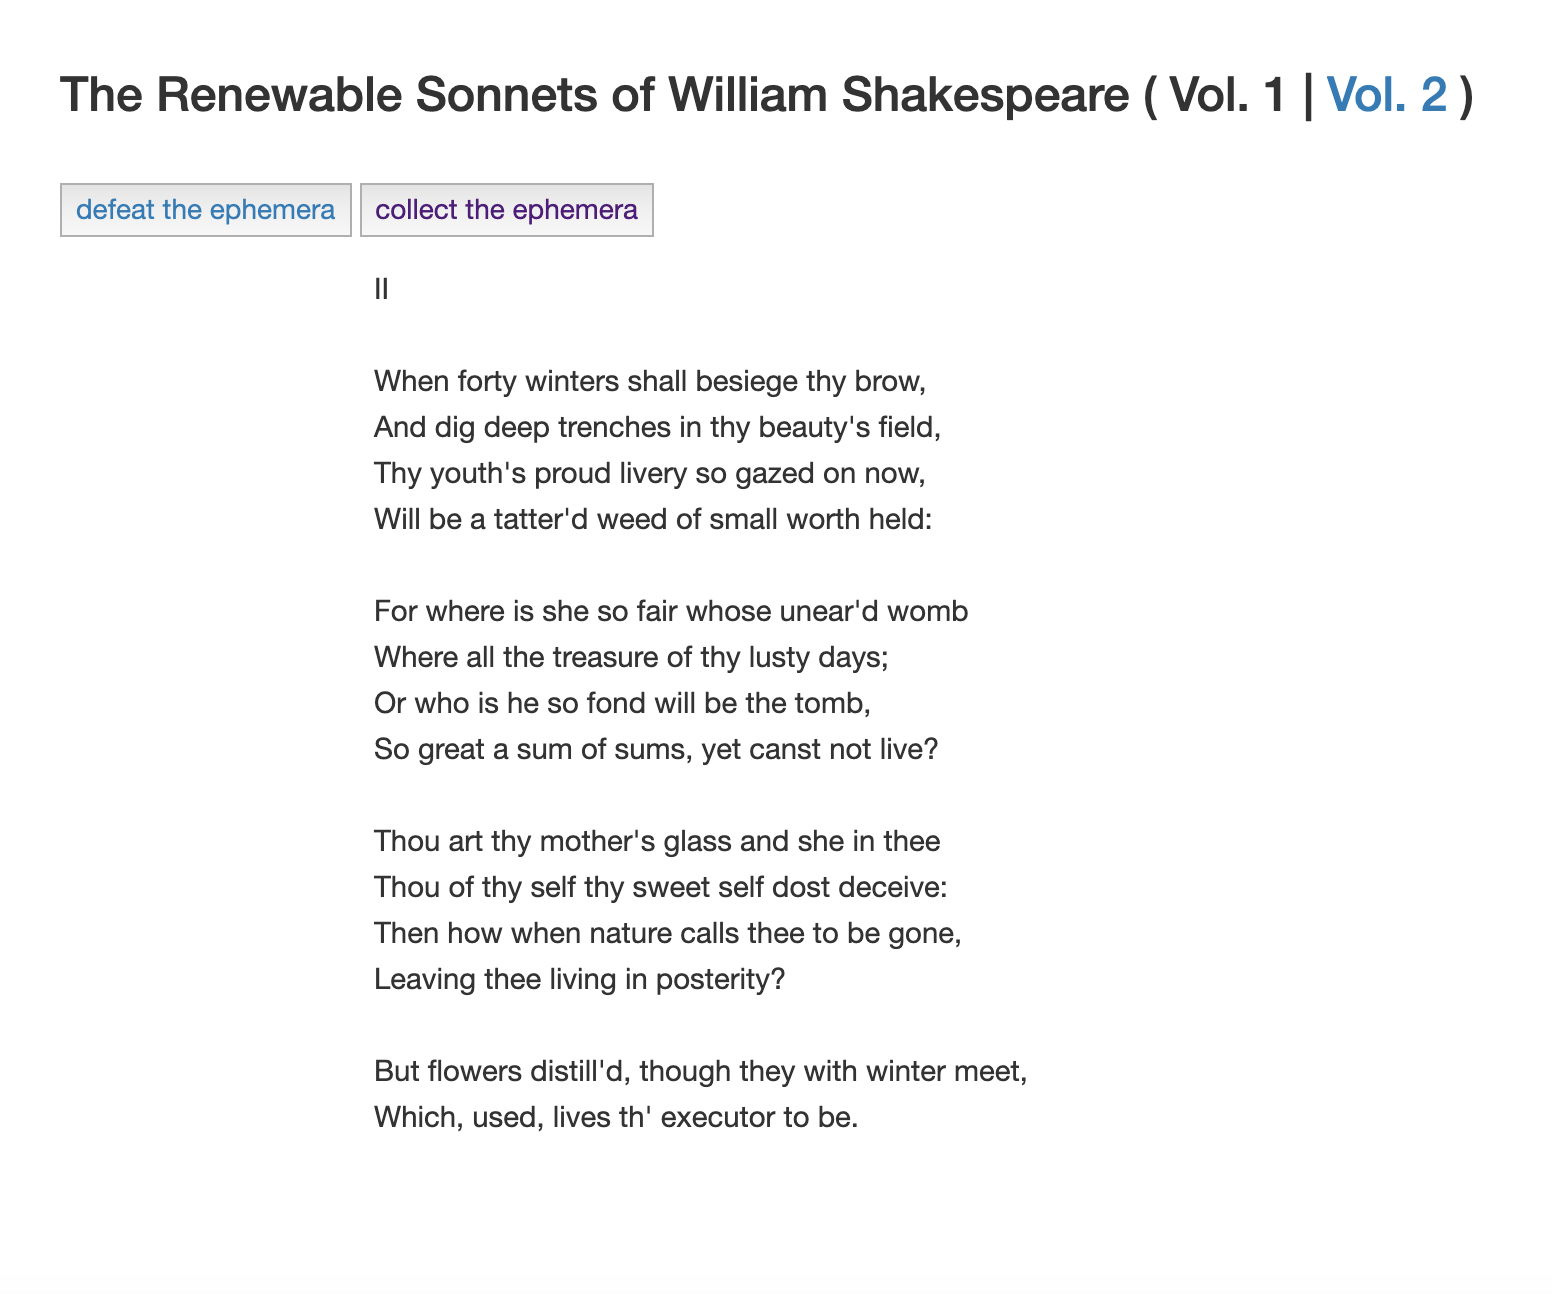 The Renewable Sonnets of William Shakespeare